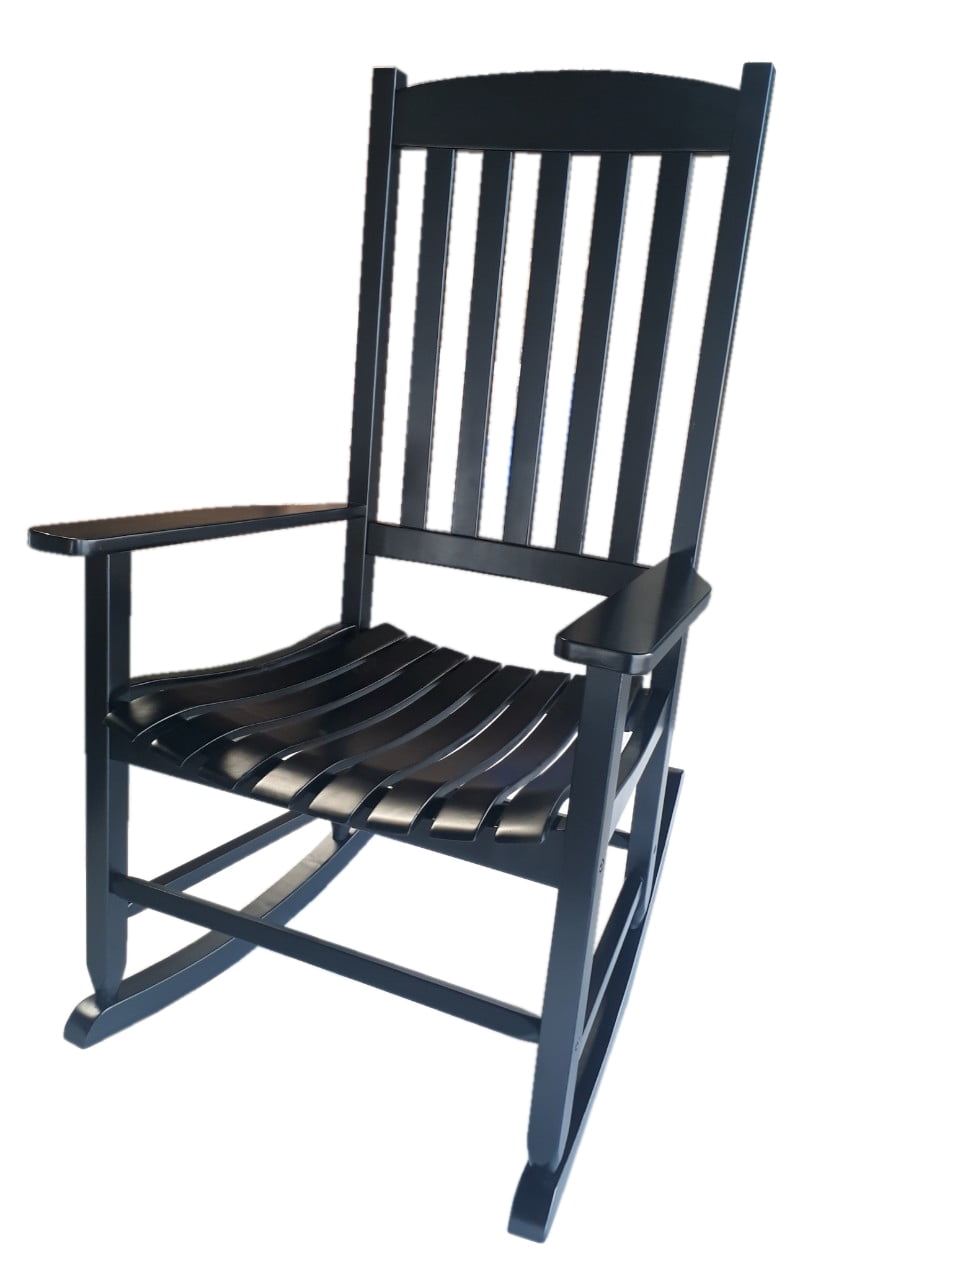 Mainstays Outdoor Wood Porch Rocking, Mainstays Black Solid Wood Slat Outdoor Rocking Chair